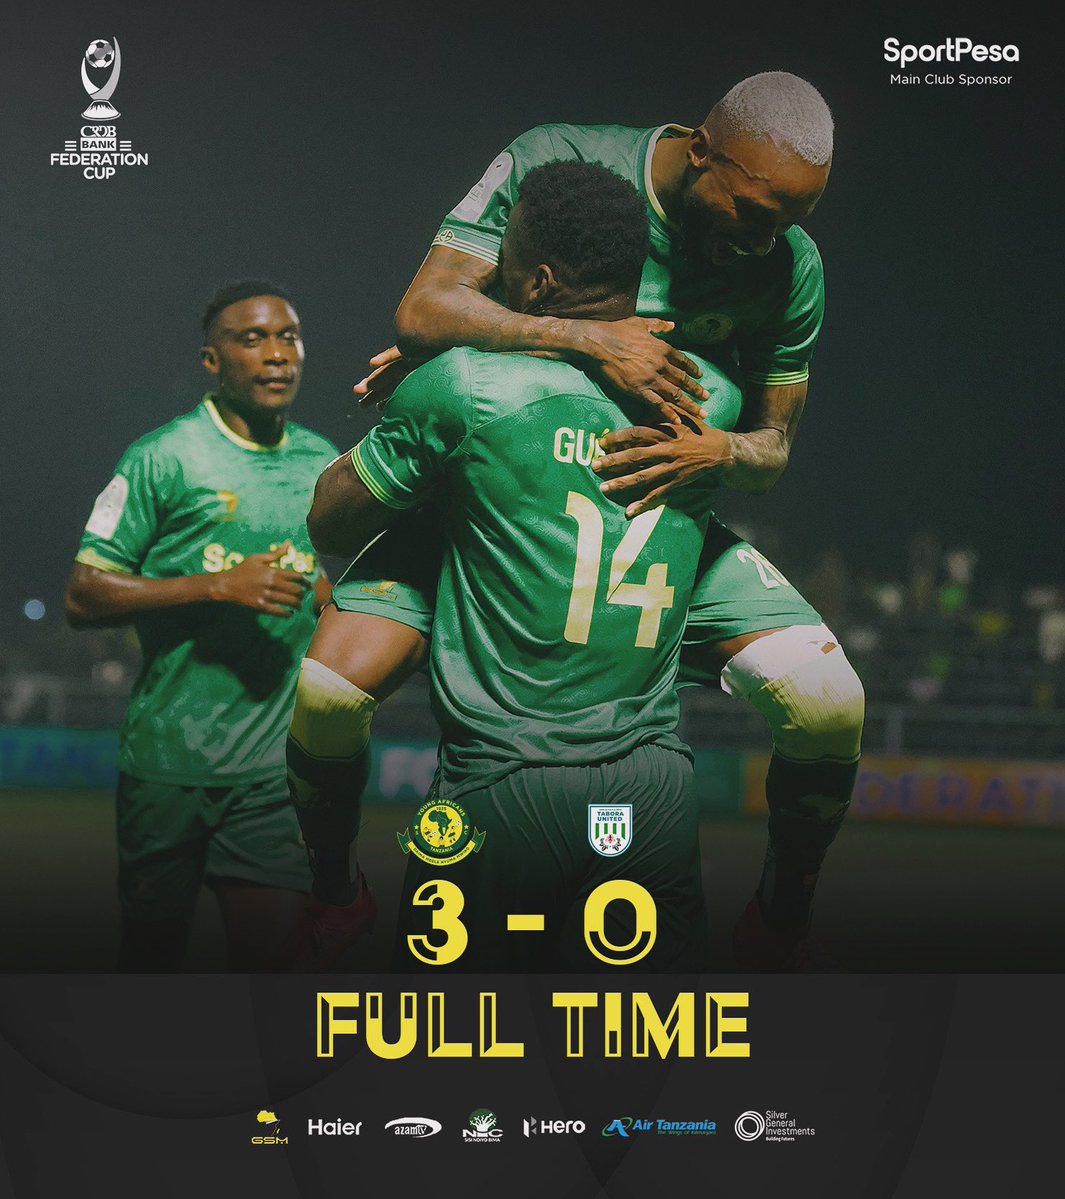 𝐅𝐔𝐋𝐋 𝐓𝐈𝐌𝐄⏱️| #CRDBBankFederationCup Young Africans SC 3-0 Tabora United #TheClubAboveAll #DaimaMbeleNyumaMwiko